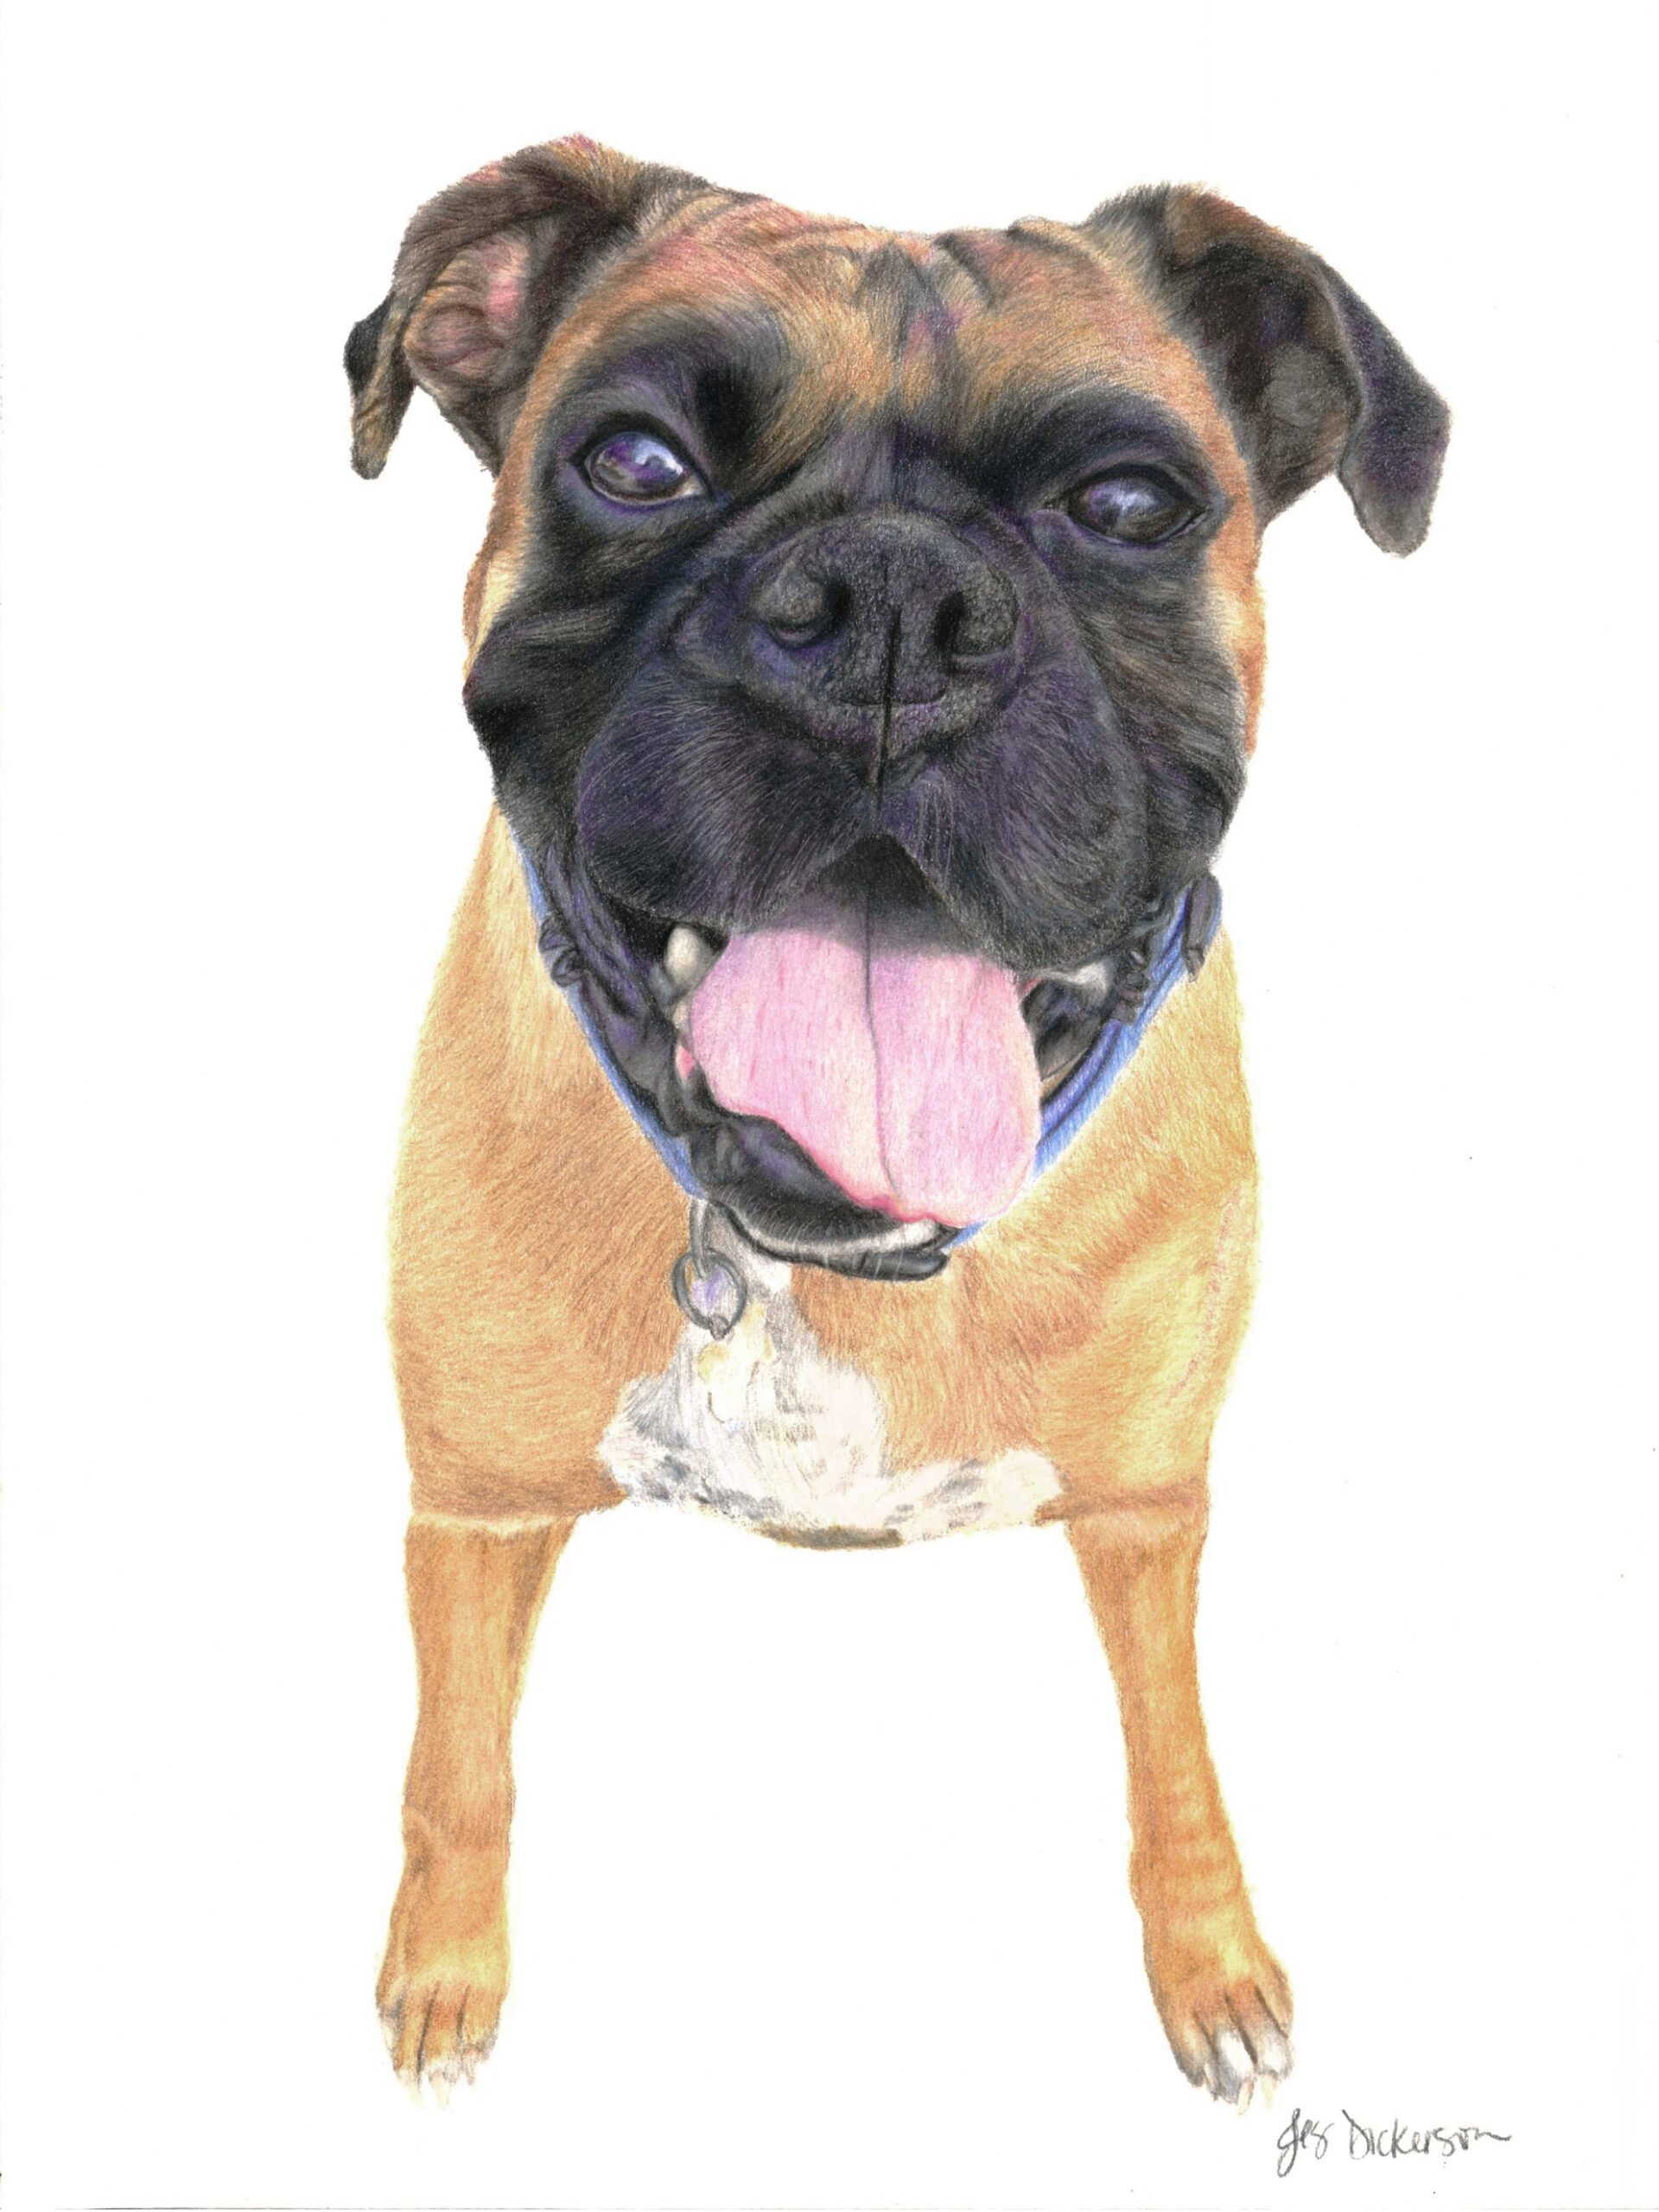 Colored pencil portrait of a brown boxer drawn by Jes Dickerson